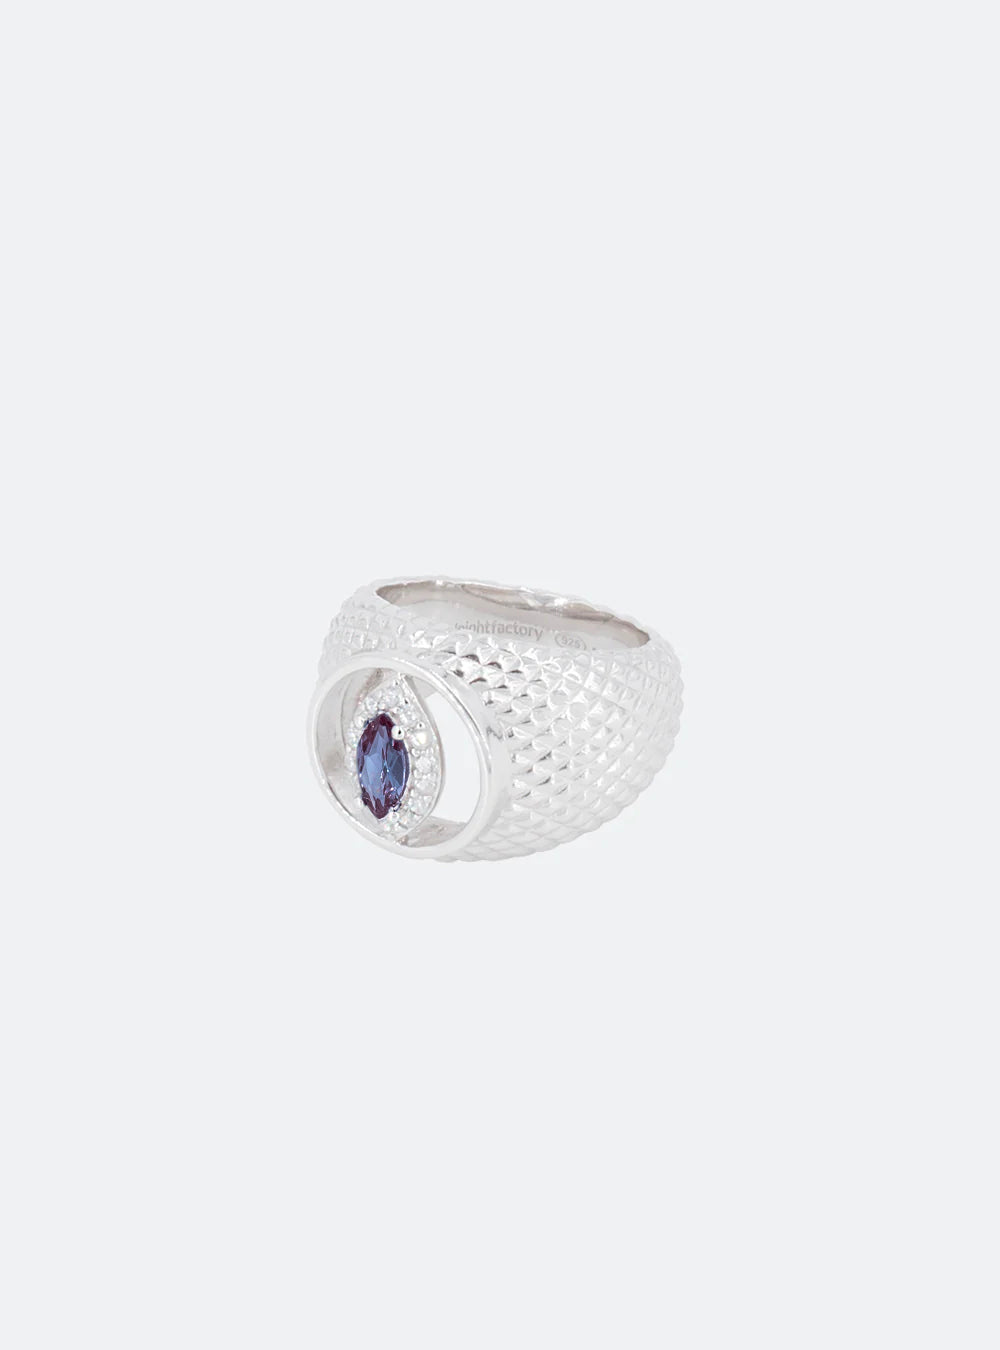 A Cat-eye cutout Alexandrite cocktail signet ring from MIDNIGHTFACTORY with a blue sapphire.